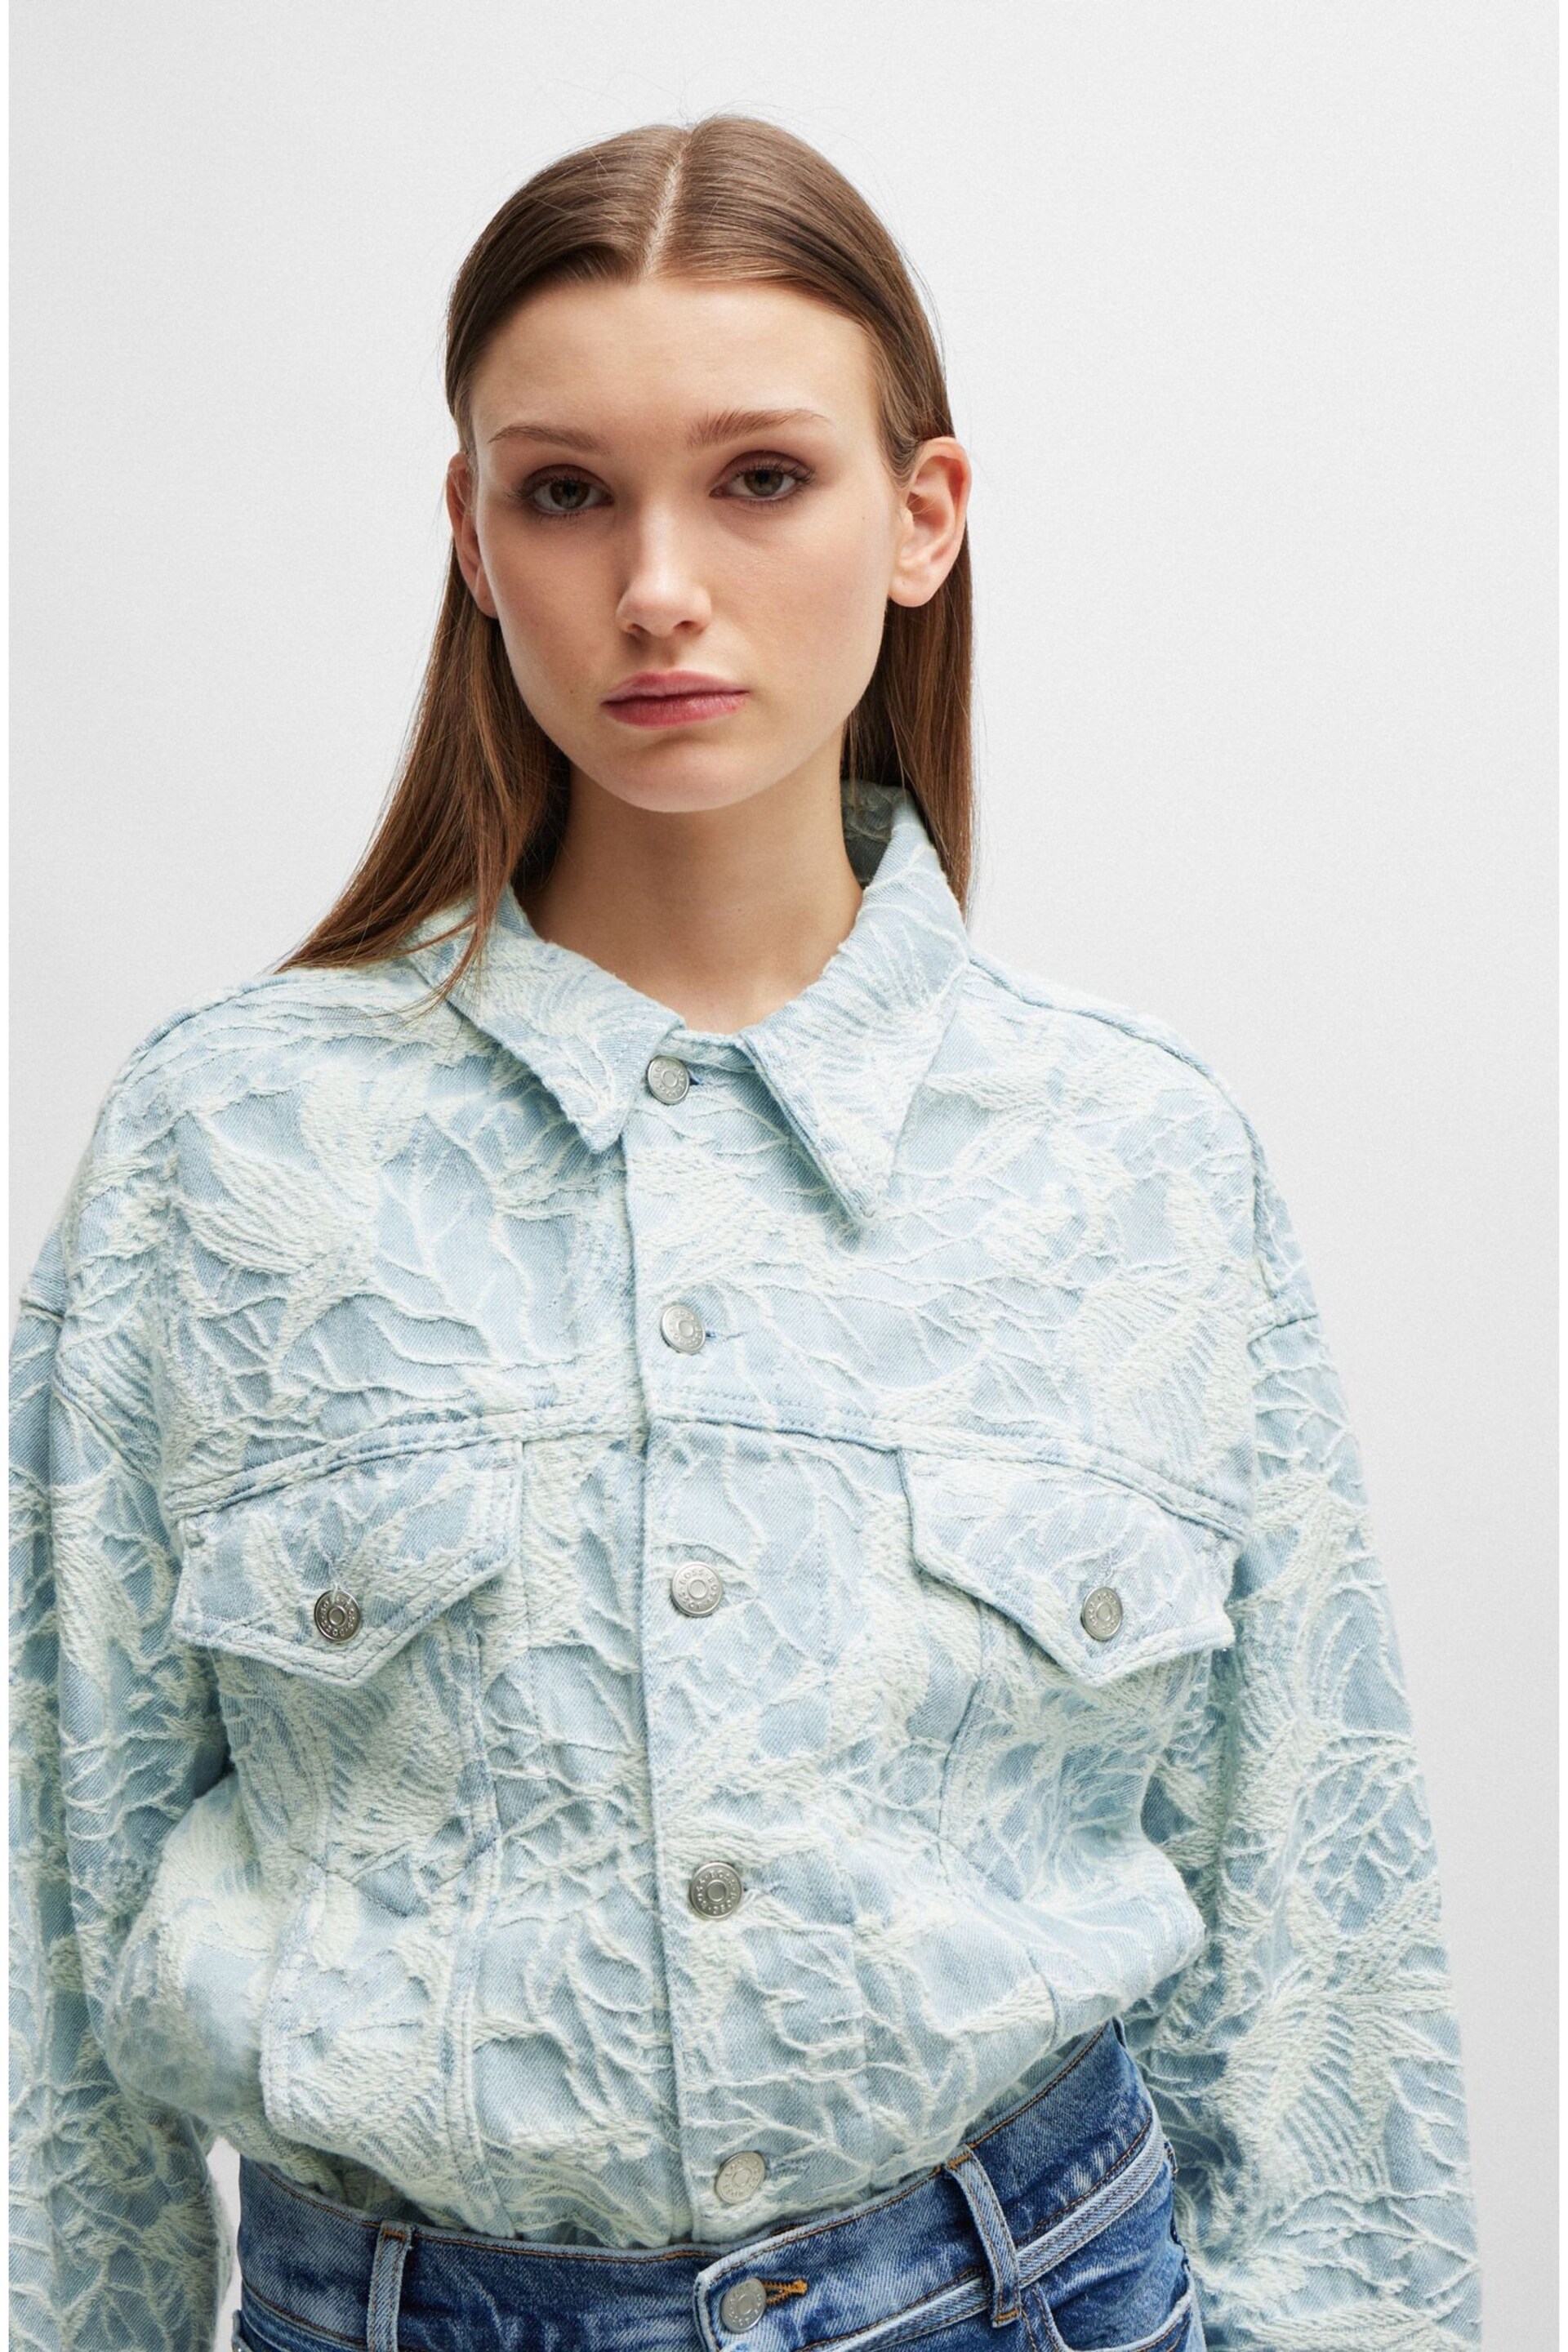 BOSS Blue BOSS Blue Cotton-Denim Jacket With Embroidered Pattern - Image 2 of 6